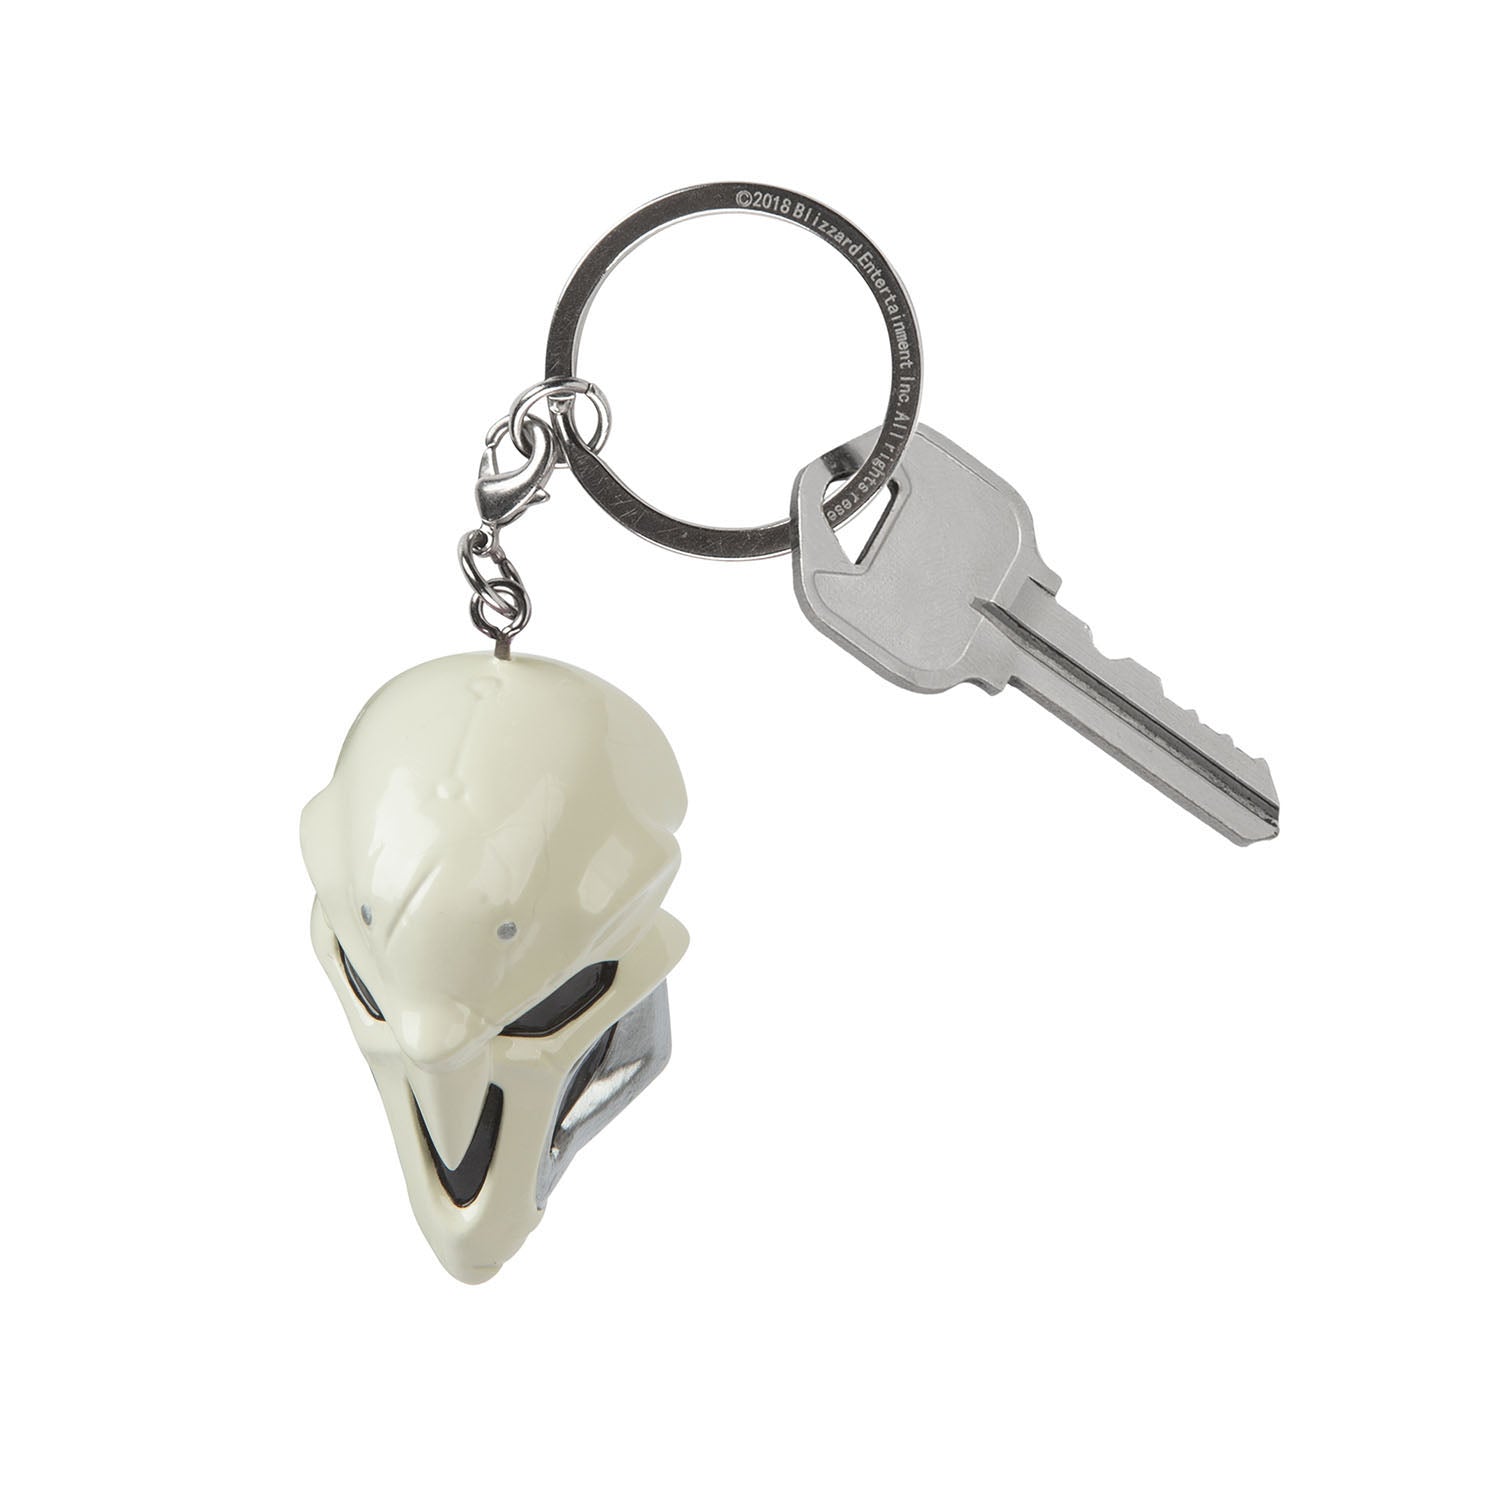 Overwatch Reaper Mask J!NX 3D Keyring in White - Front Left View